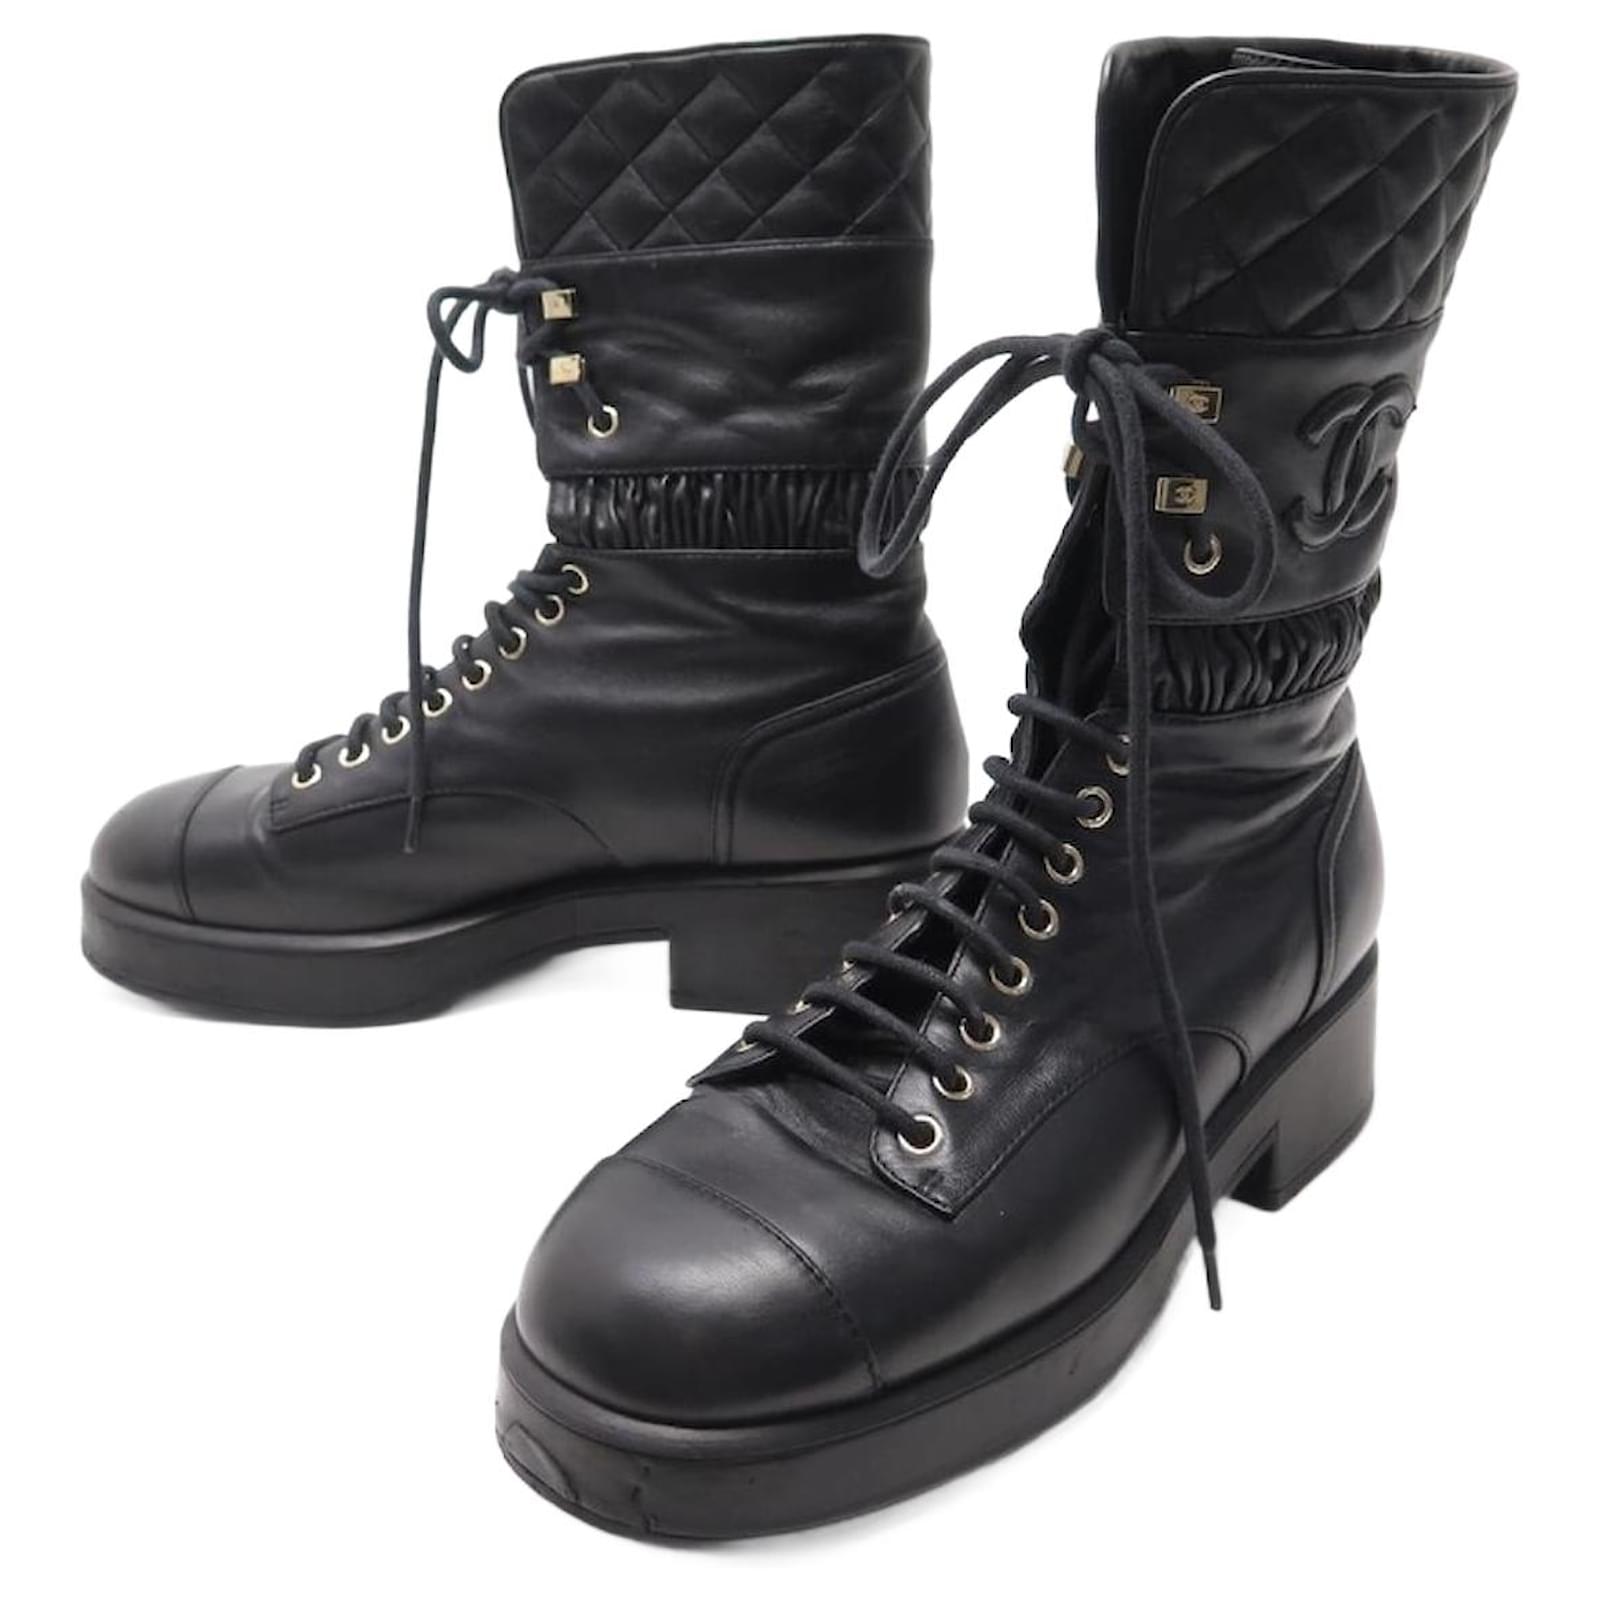 Ankle Boots Chanel New Chanel G Ankle BOOTS30289 36.5 37 Quilted Leather Rangers Combat Boots